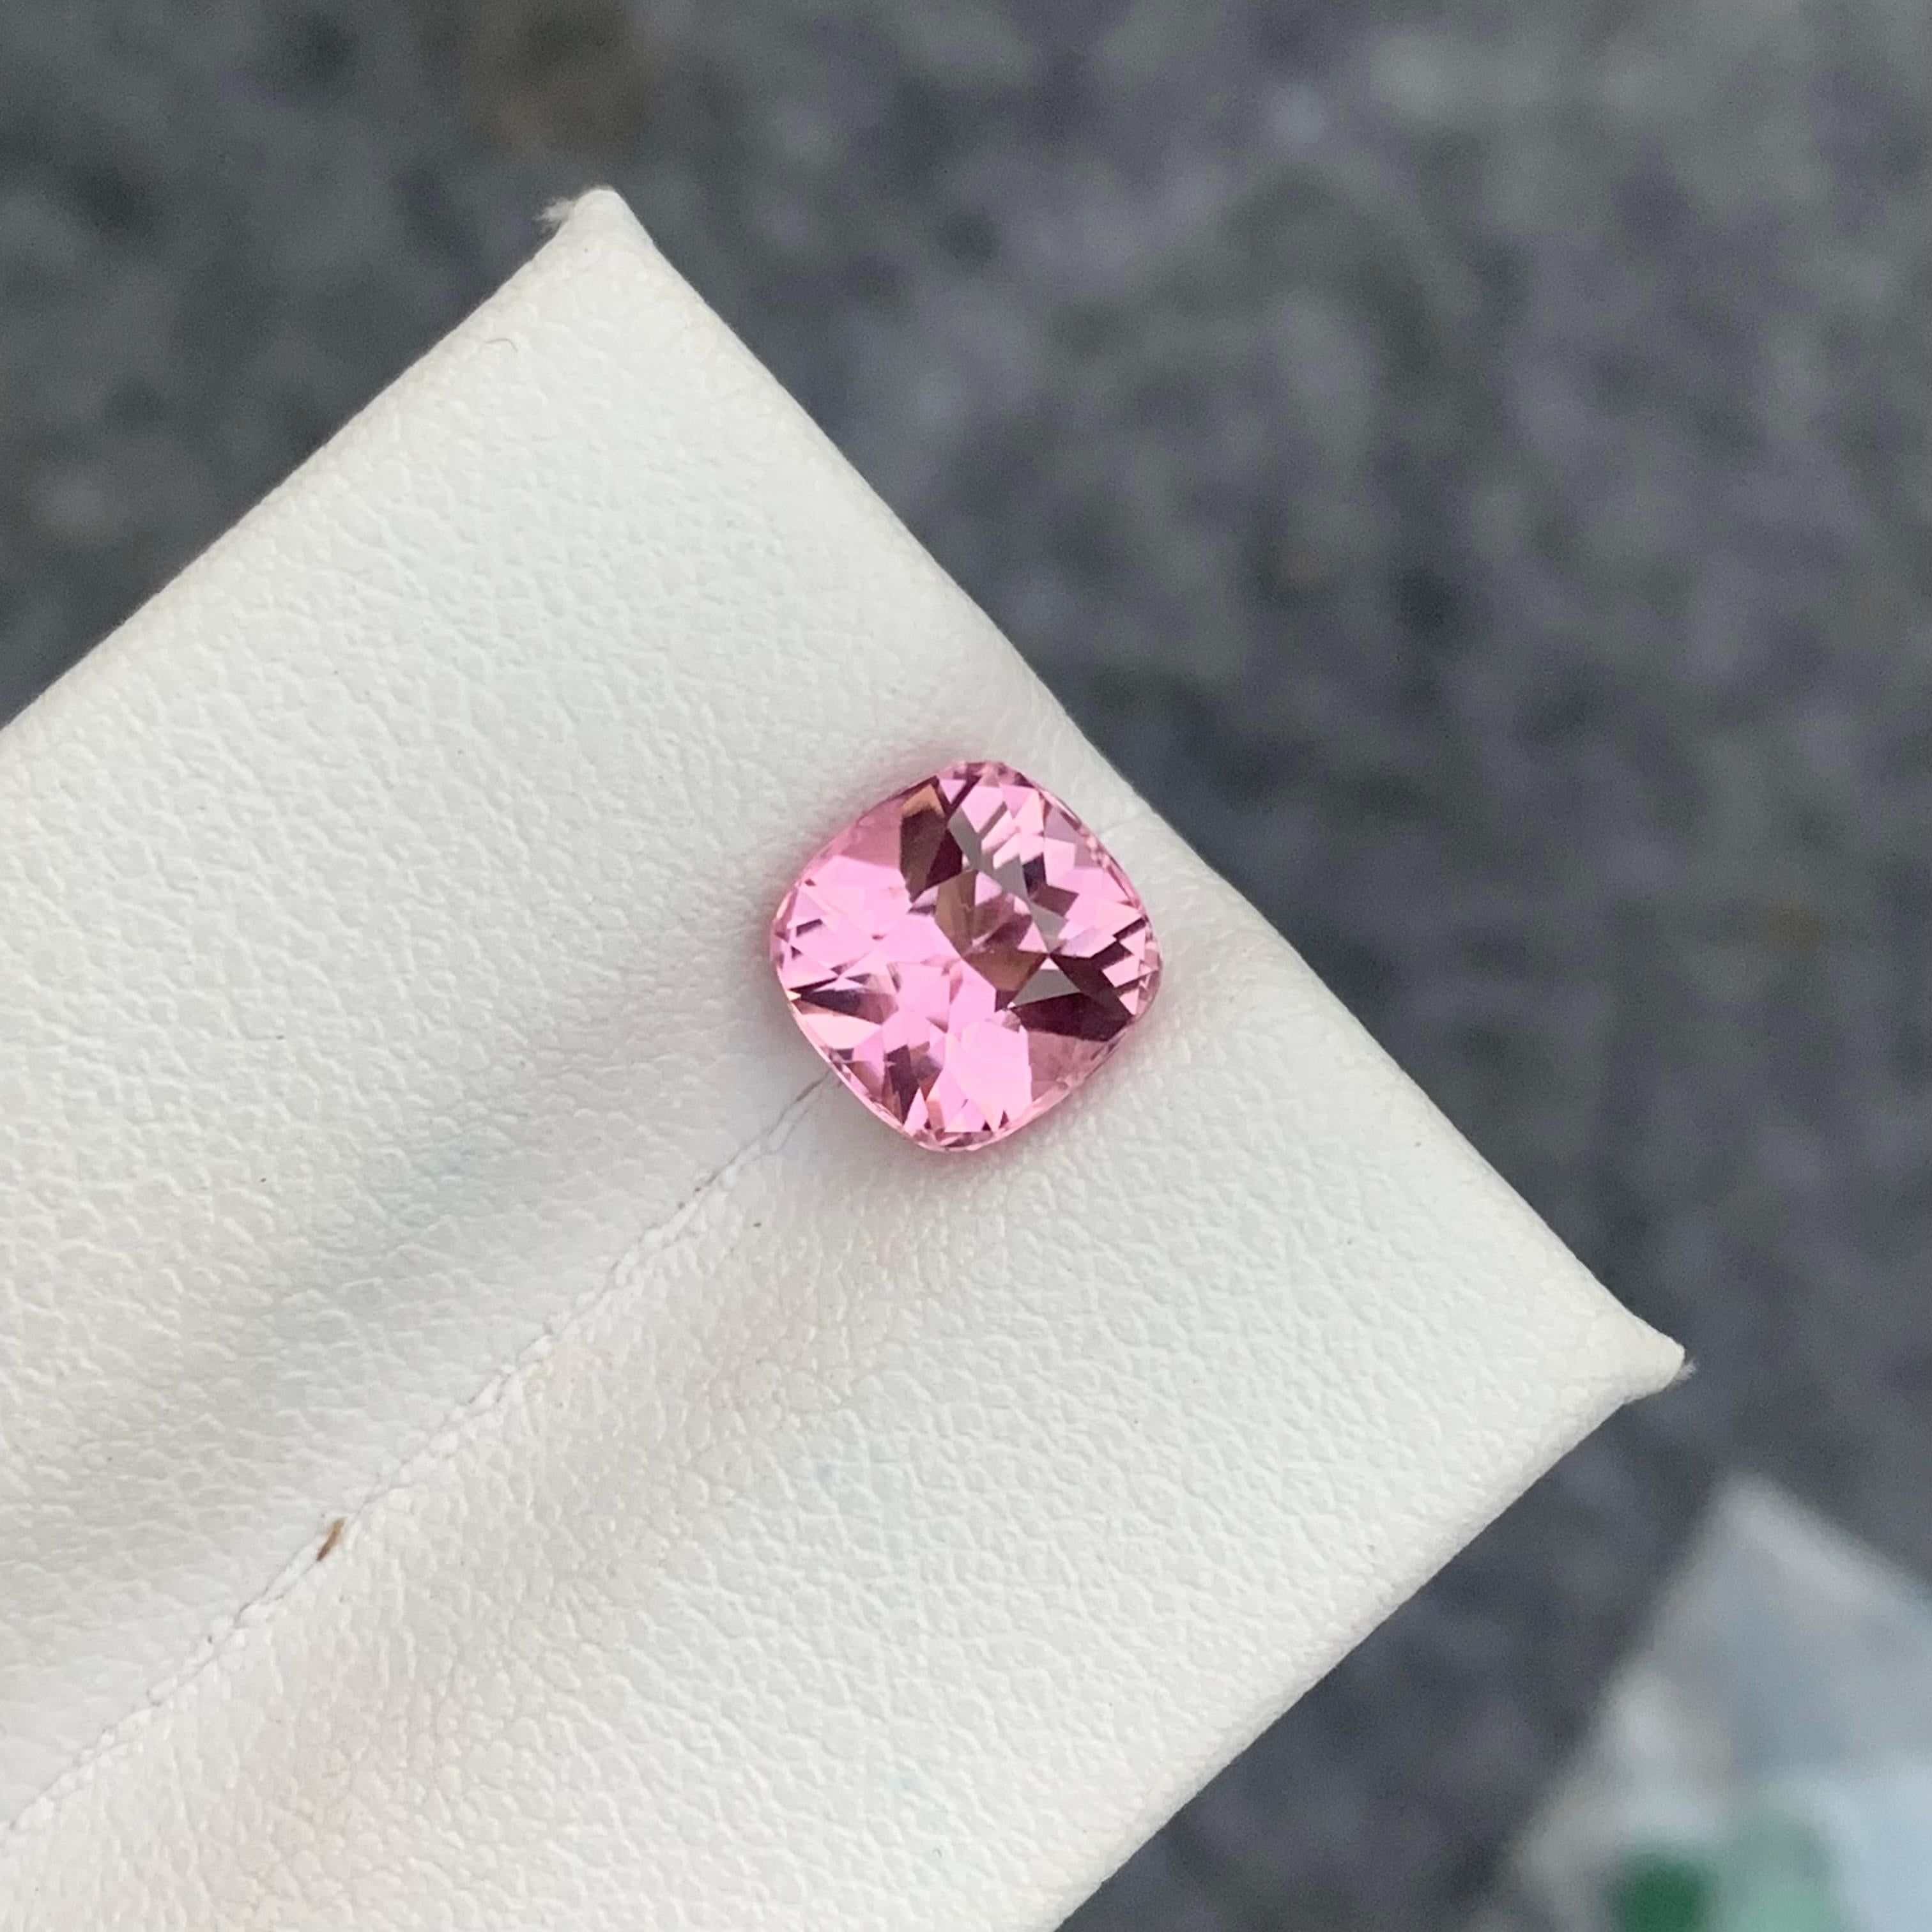 Exceptional 2.0 Carat Natural Loose Baby Pink Tourmaline from Afghan Mine For Sale 4